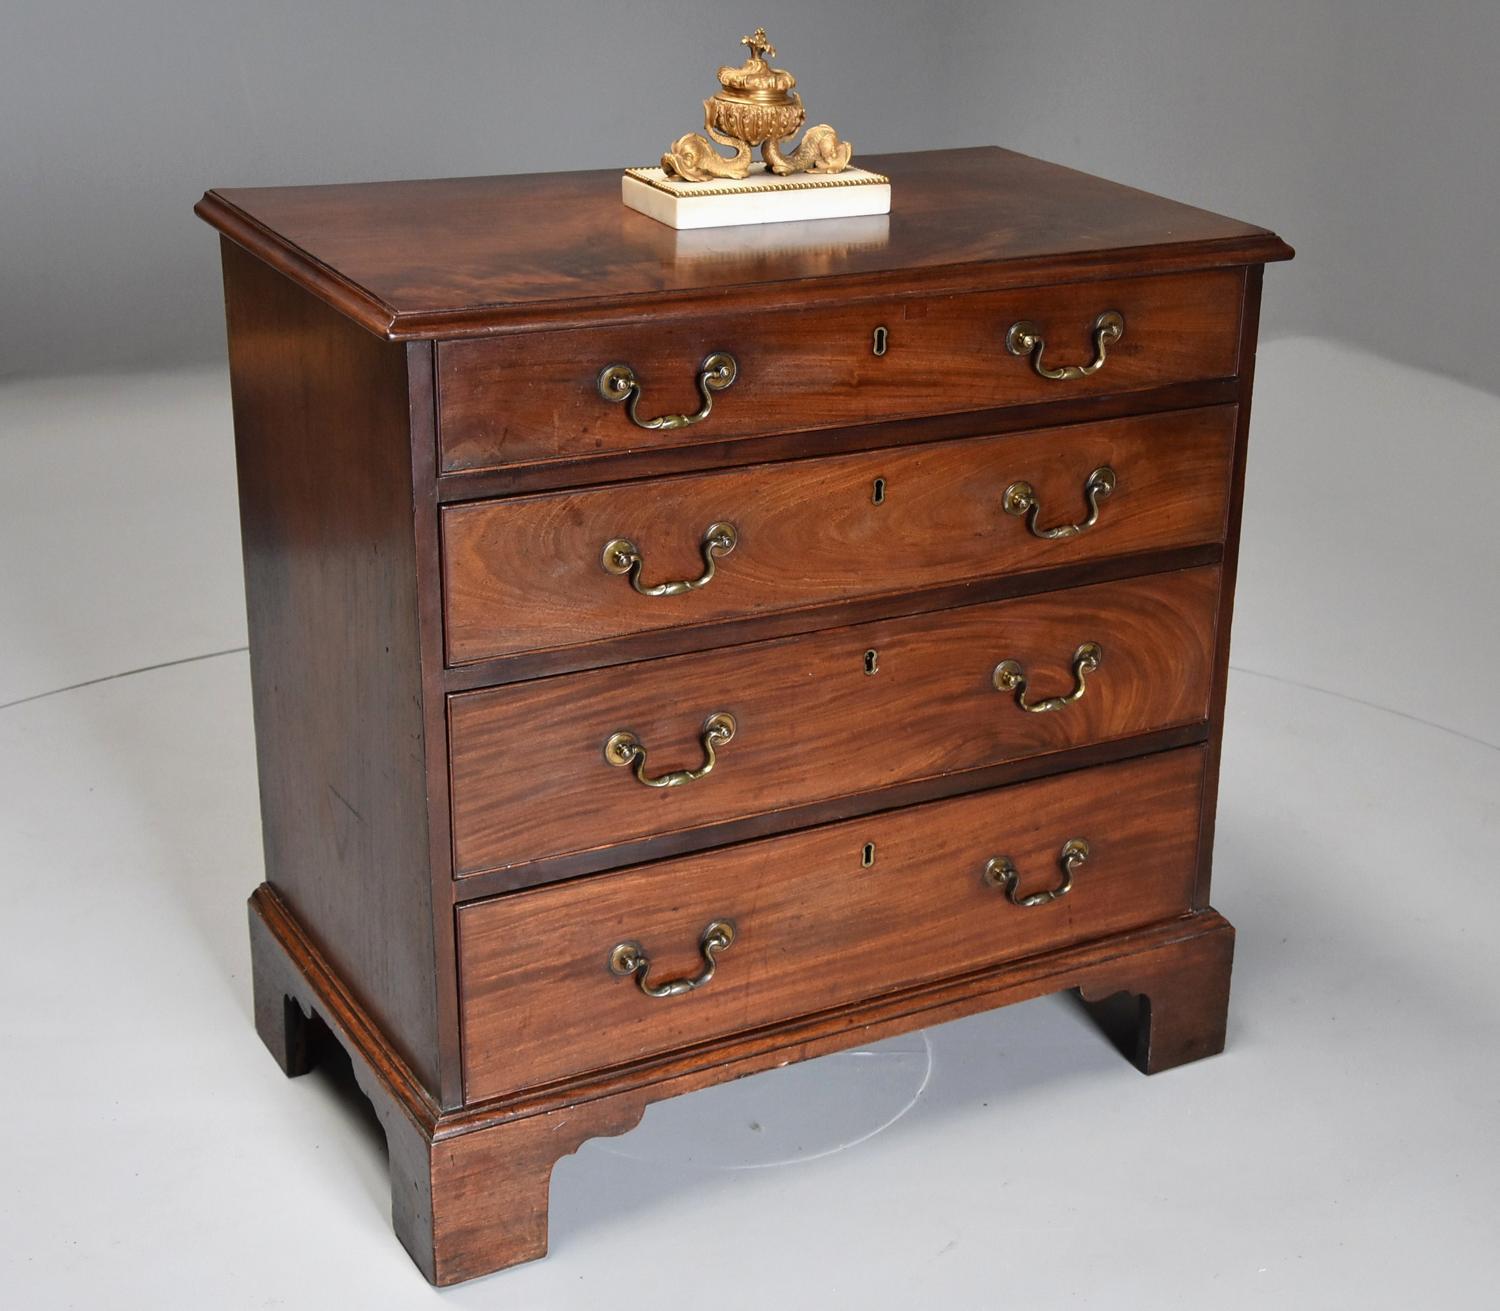 Late 18thc small Georgian mahogany chest of drawers